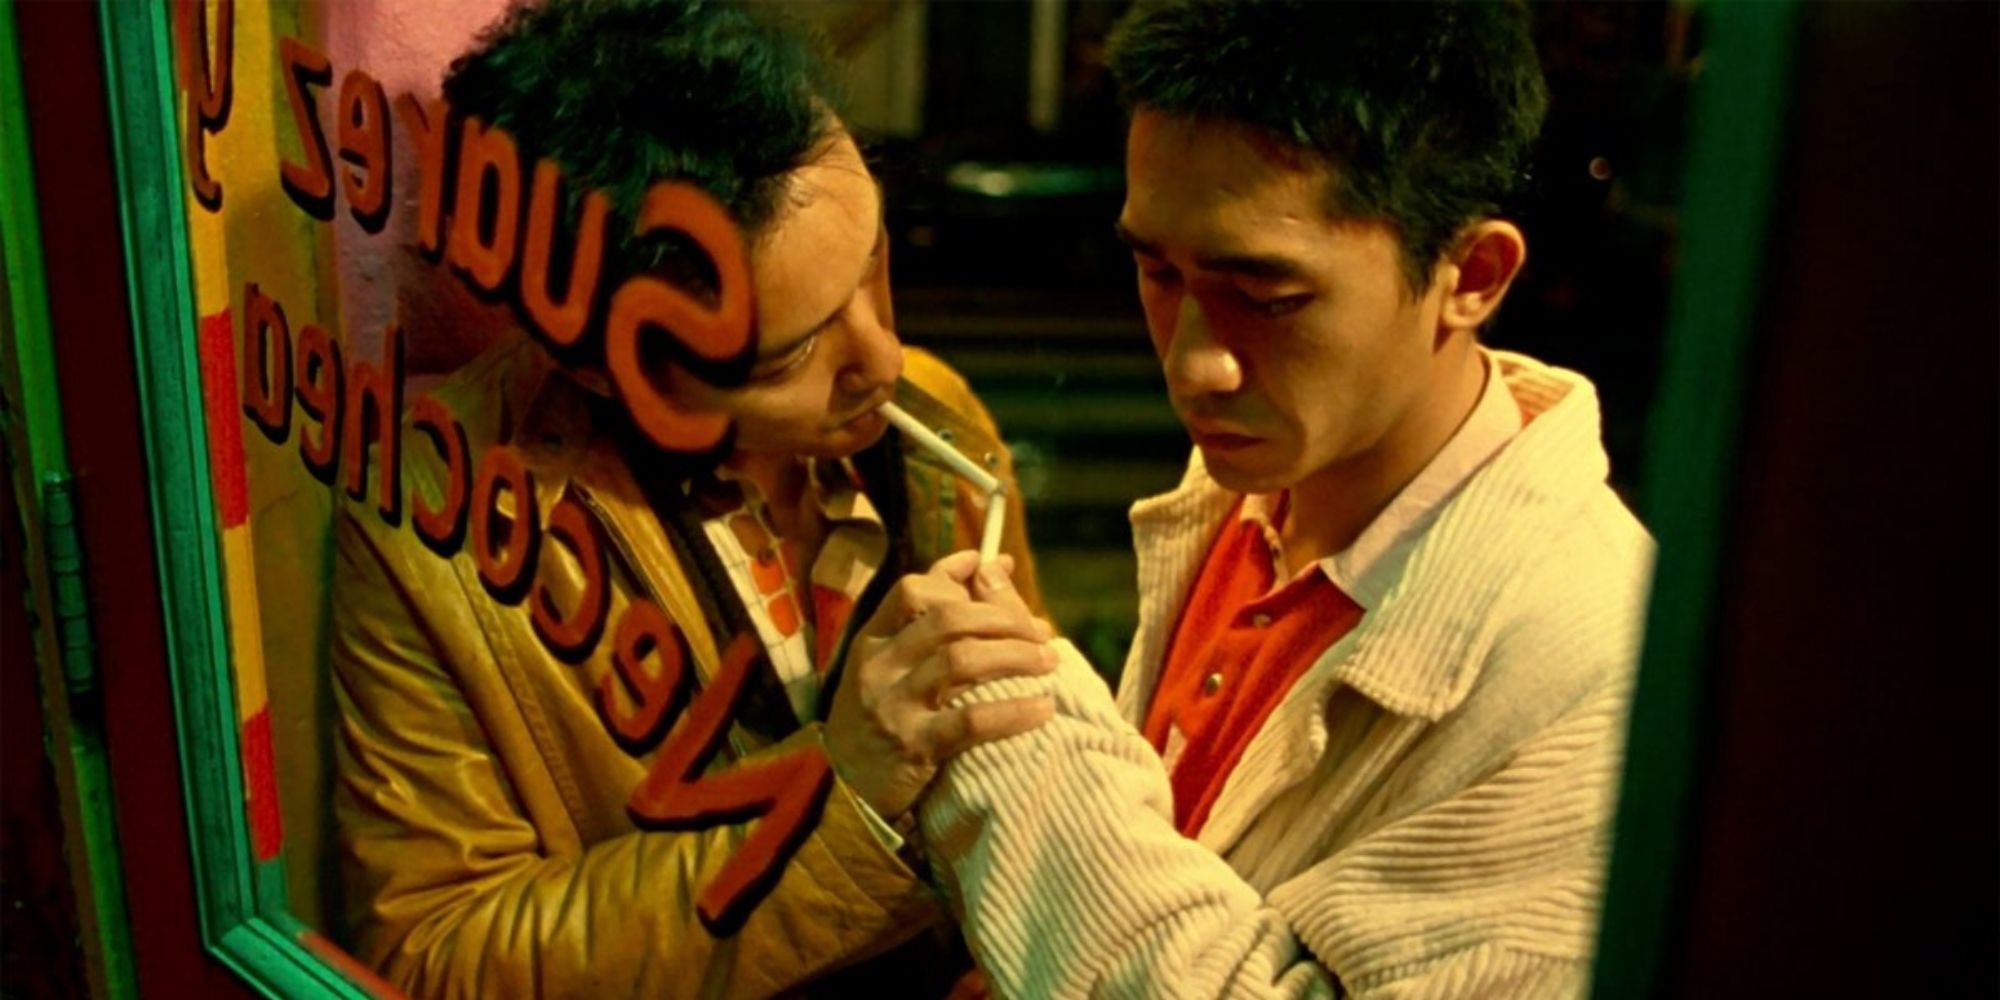 Leslie Cheung and Tony Leung smoking together outside in Happy Together